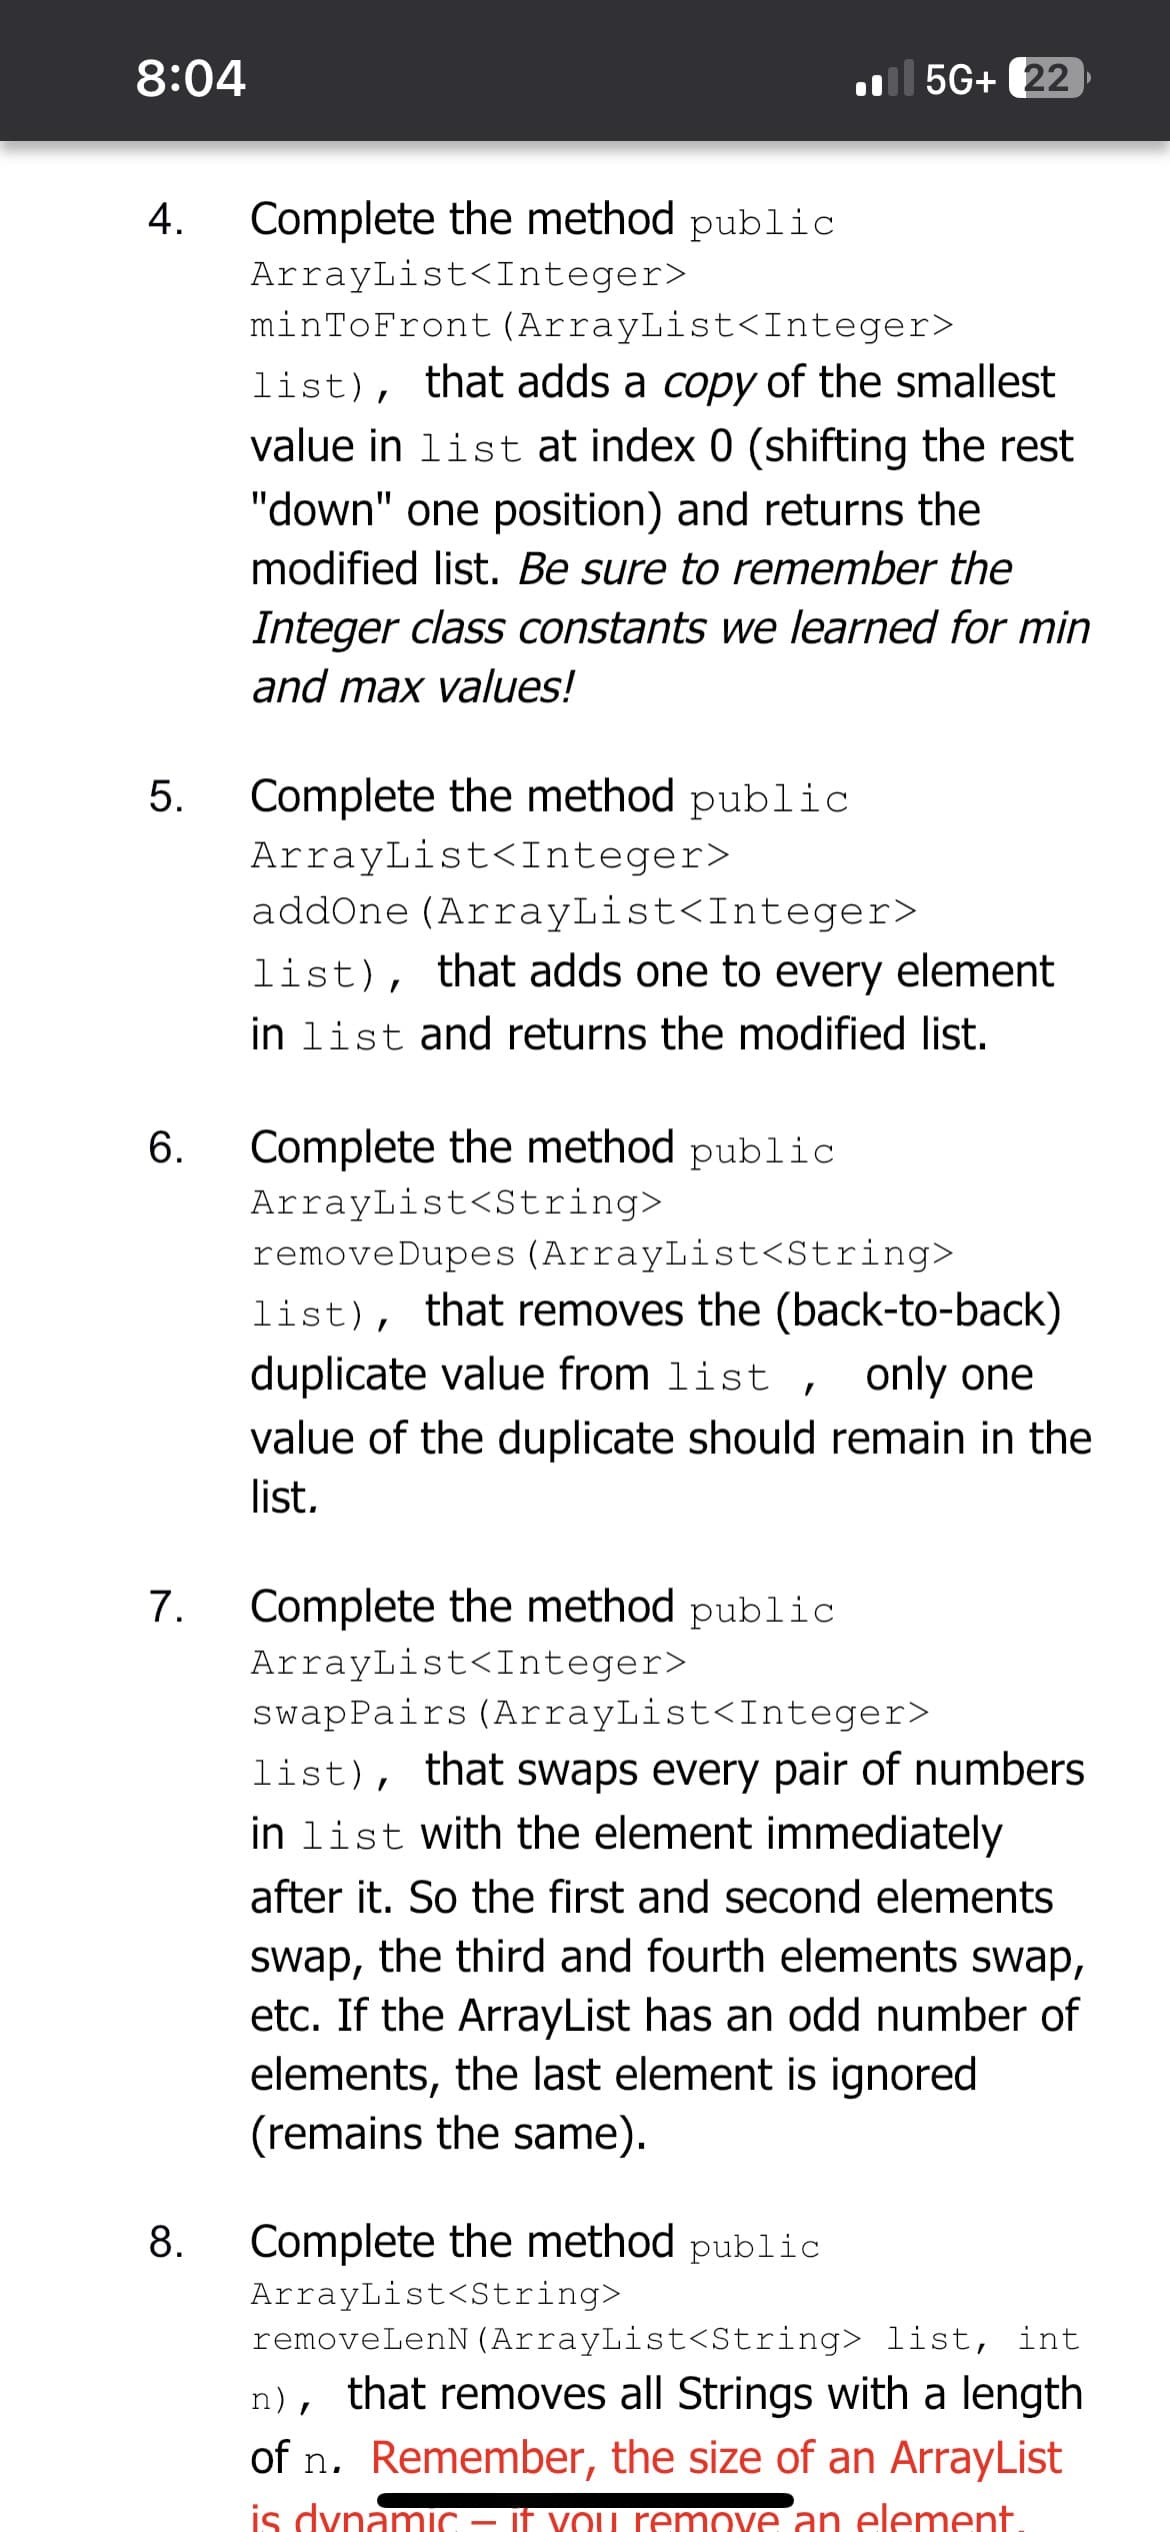 8:04
4. Complete the method public
ArrayList<Integer>
5.
6.
7.
minToFront (ArrayList<Integer>
list), that adds a copy of the smallest
value in list at index 0 (shifting the rest
"down" one position) and returns the
modified list. Be sure to remember the
Integer class constants we learned for min
and max values!
Complete the method public
ArrayList<Integer>
addOne (ArrayList<Integer>
list), that adds one to every element
in list and returns the modified list.
Complete the method public
ArrayList<String>
5G+ 22
removeDupes (ArrayList<String>
list), that removes the (back-to-back)
duplicate value from list, only one
value of the duplicate should remain in the
list.
Complete the method public
ArrayList<Integer>
swapPairs (ArrayList<Integer>
list), that swaps every pair of numbers
in list with the element immediately
after it. So the first and second elements
swap, the third and fourth elements swap,
etc. If the ArrayList has an odd number of
elements, the last element is ignored
(remains the same).
8. Complete the method public
ArrayList<String>
removeLenN (ArrayList<String> list, int
n), that removes all Strings with a length
of n. Remember, the size of an ArrayList
is dynamic – if you remove an element.